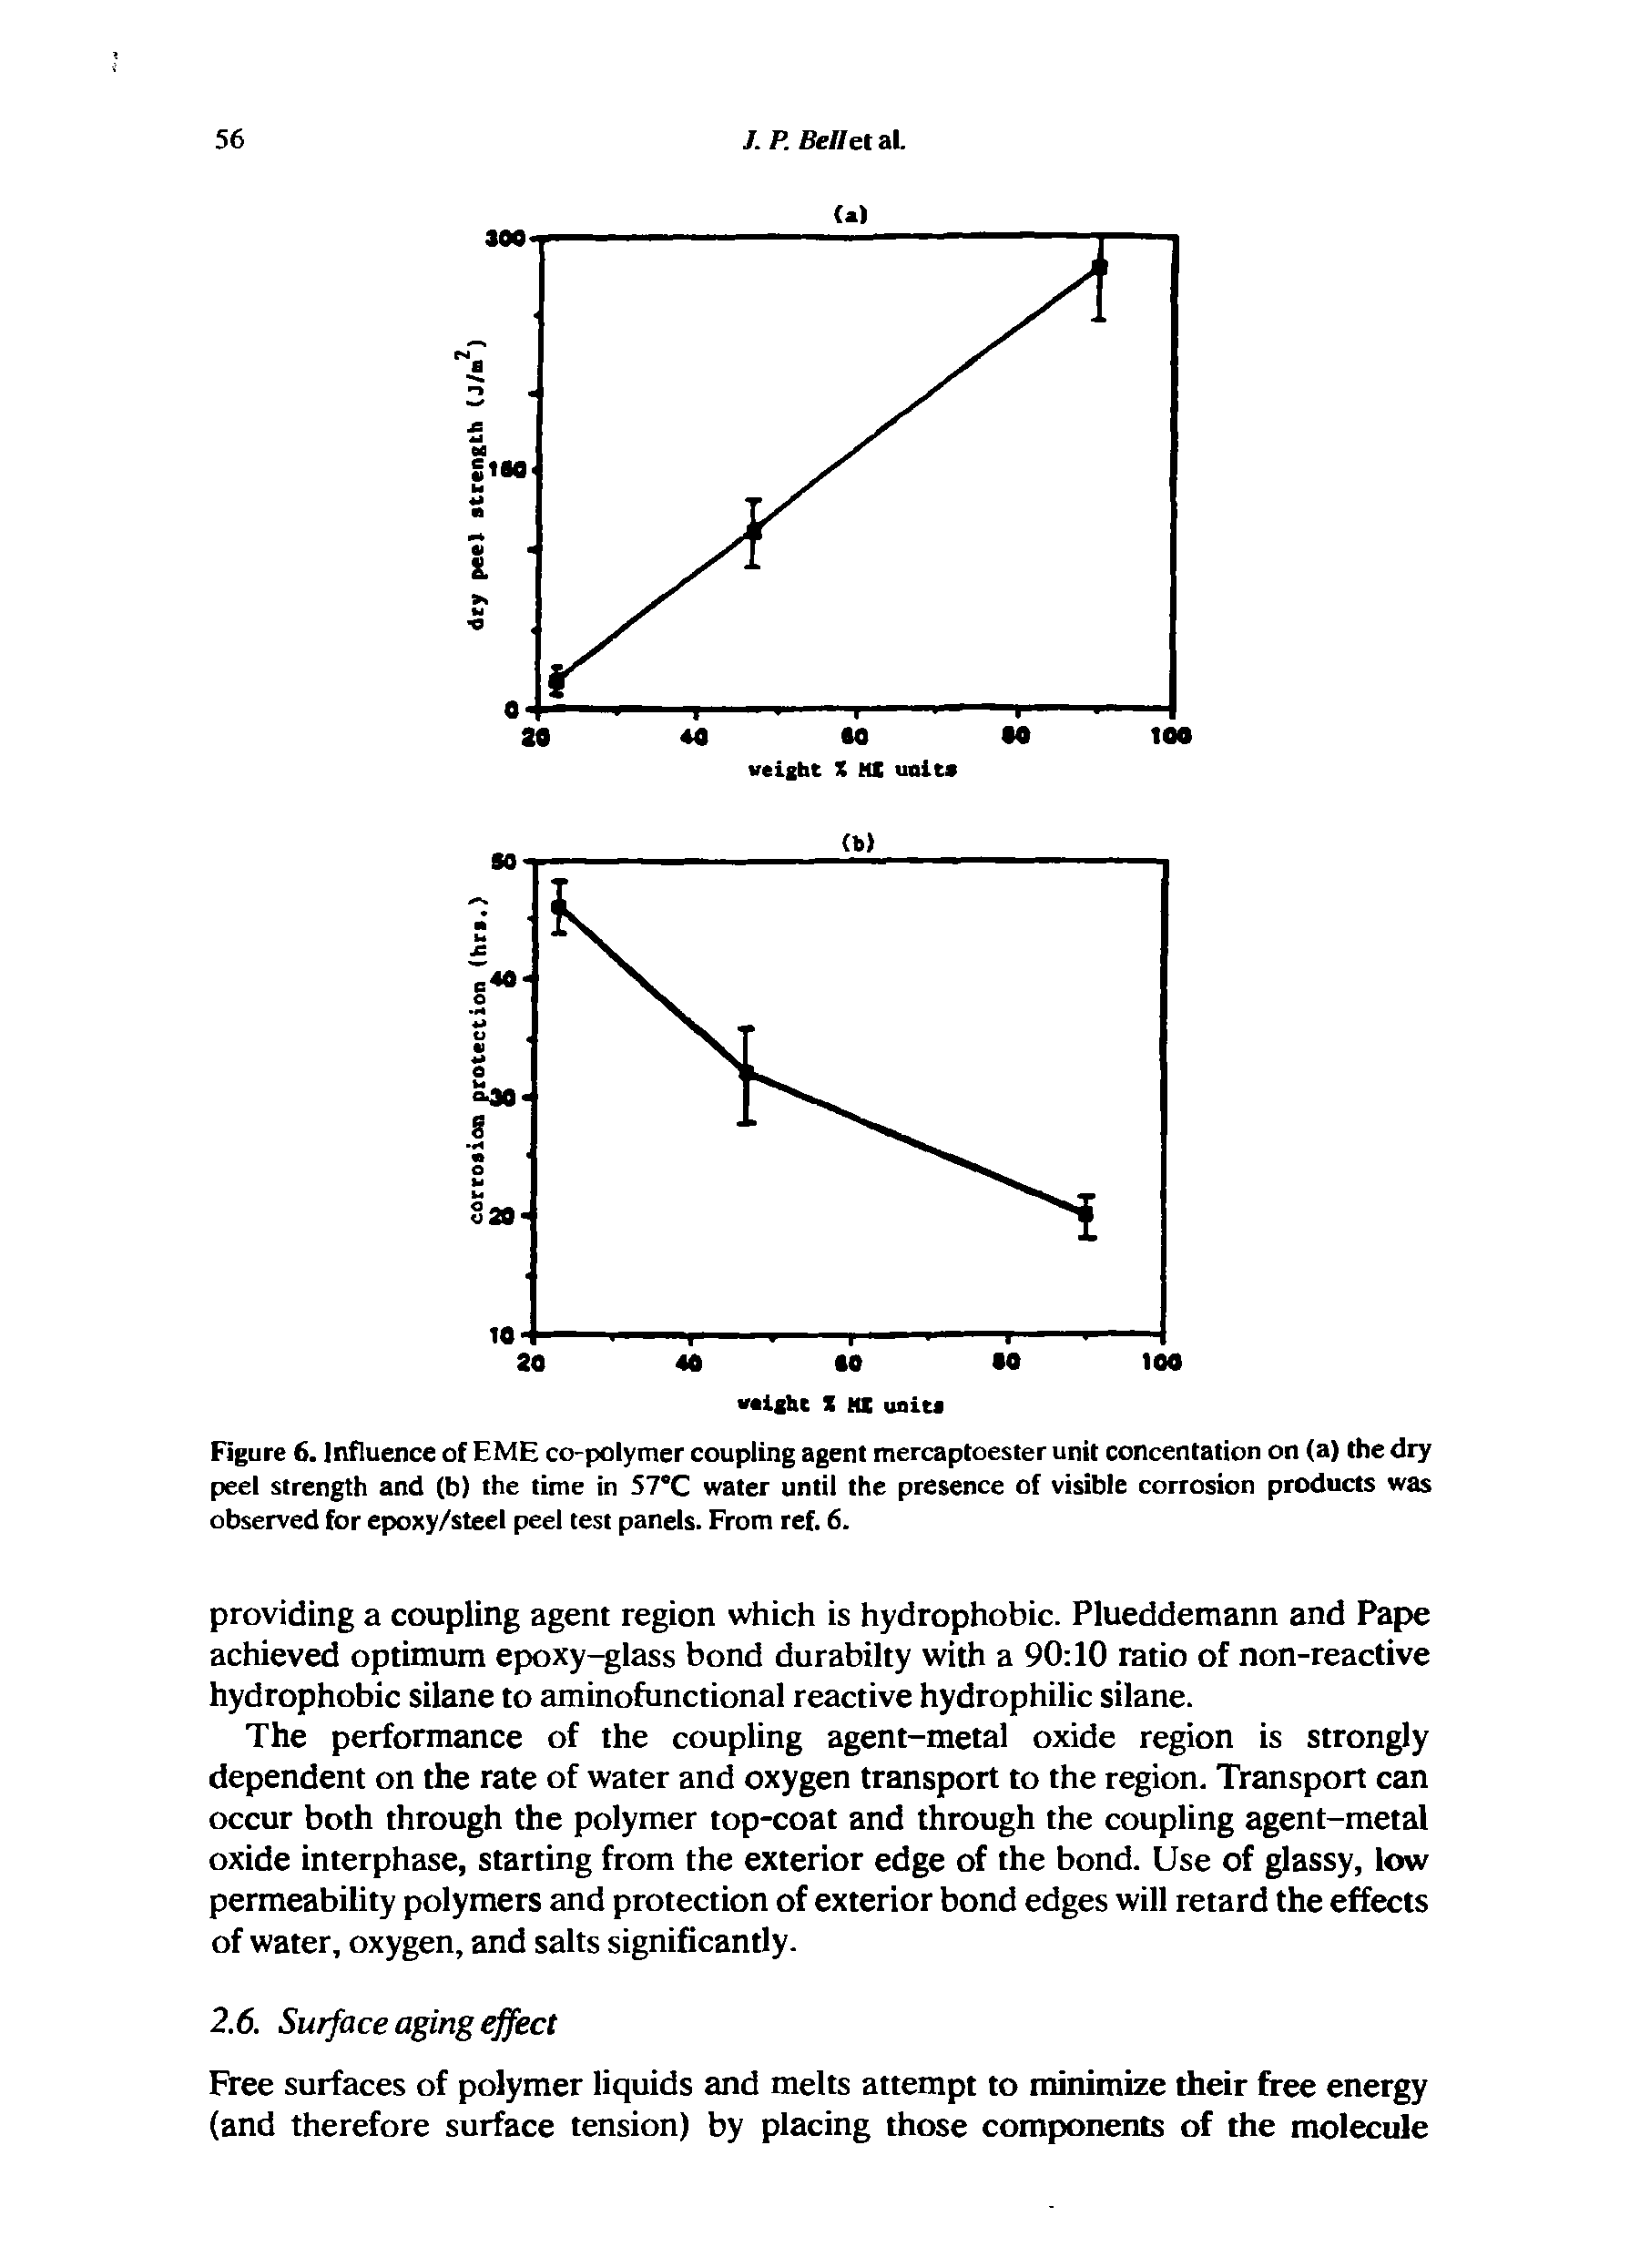 Figure 6. Influence of EME co-polymer coupling agent mercaptoester unit concentation on (a) the dry peel strength and (b) the time in 57 C water until the presence of visible corrosion products was observed for epoxy/steel peel test panels. From ref. 6.